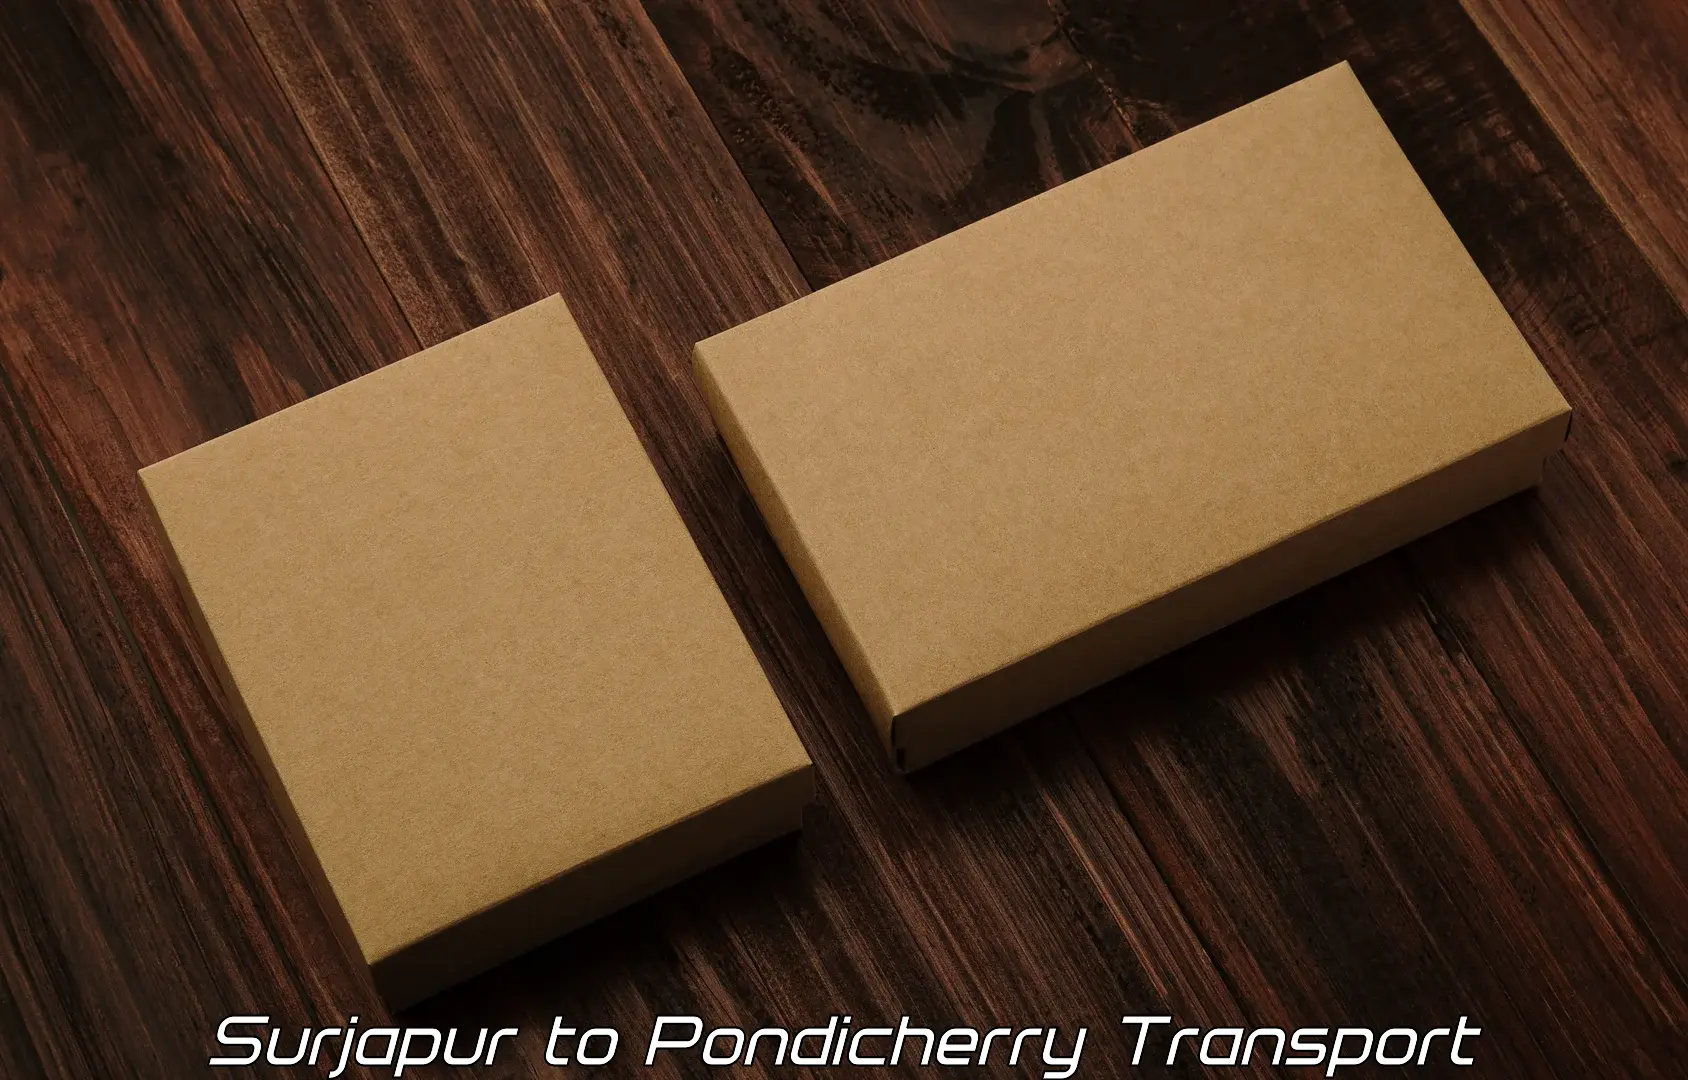 Scooty transport charges Surjapur to Pondicherry